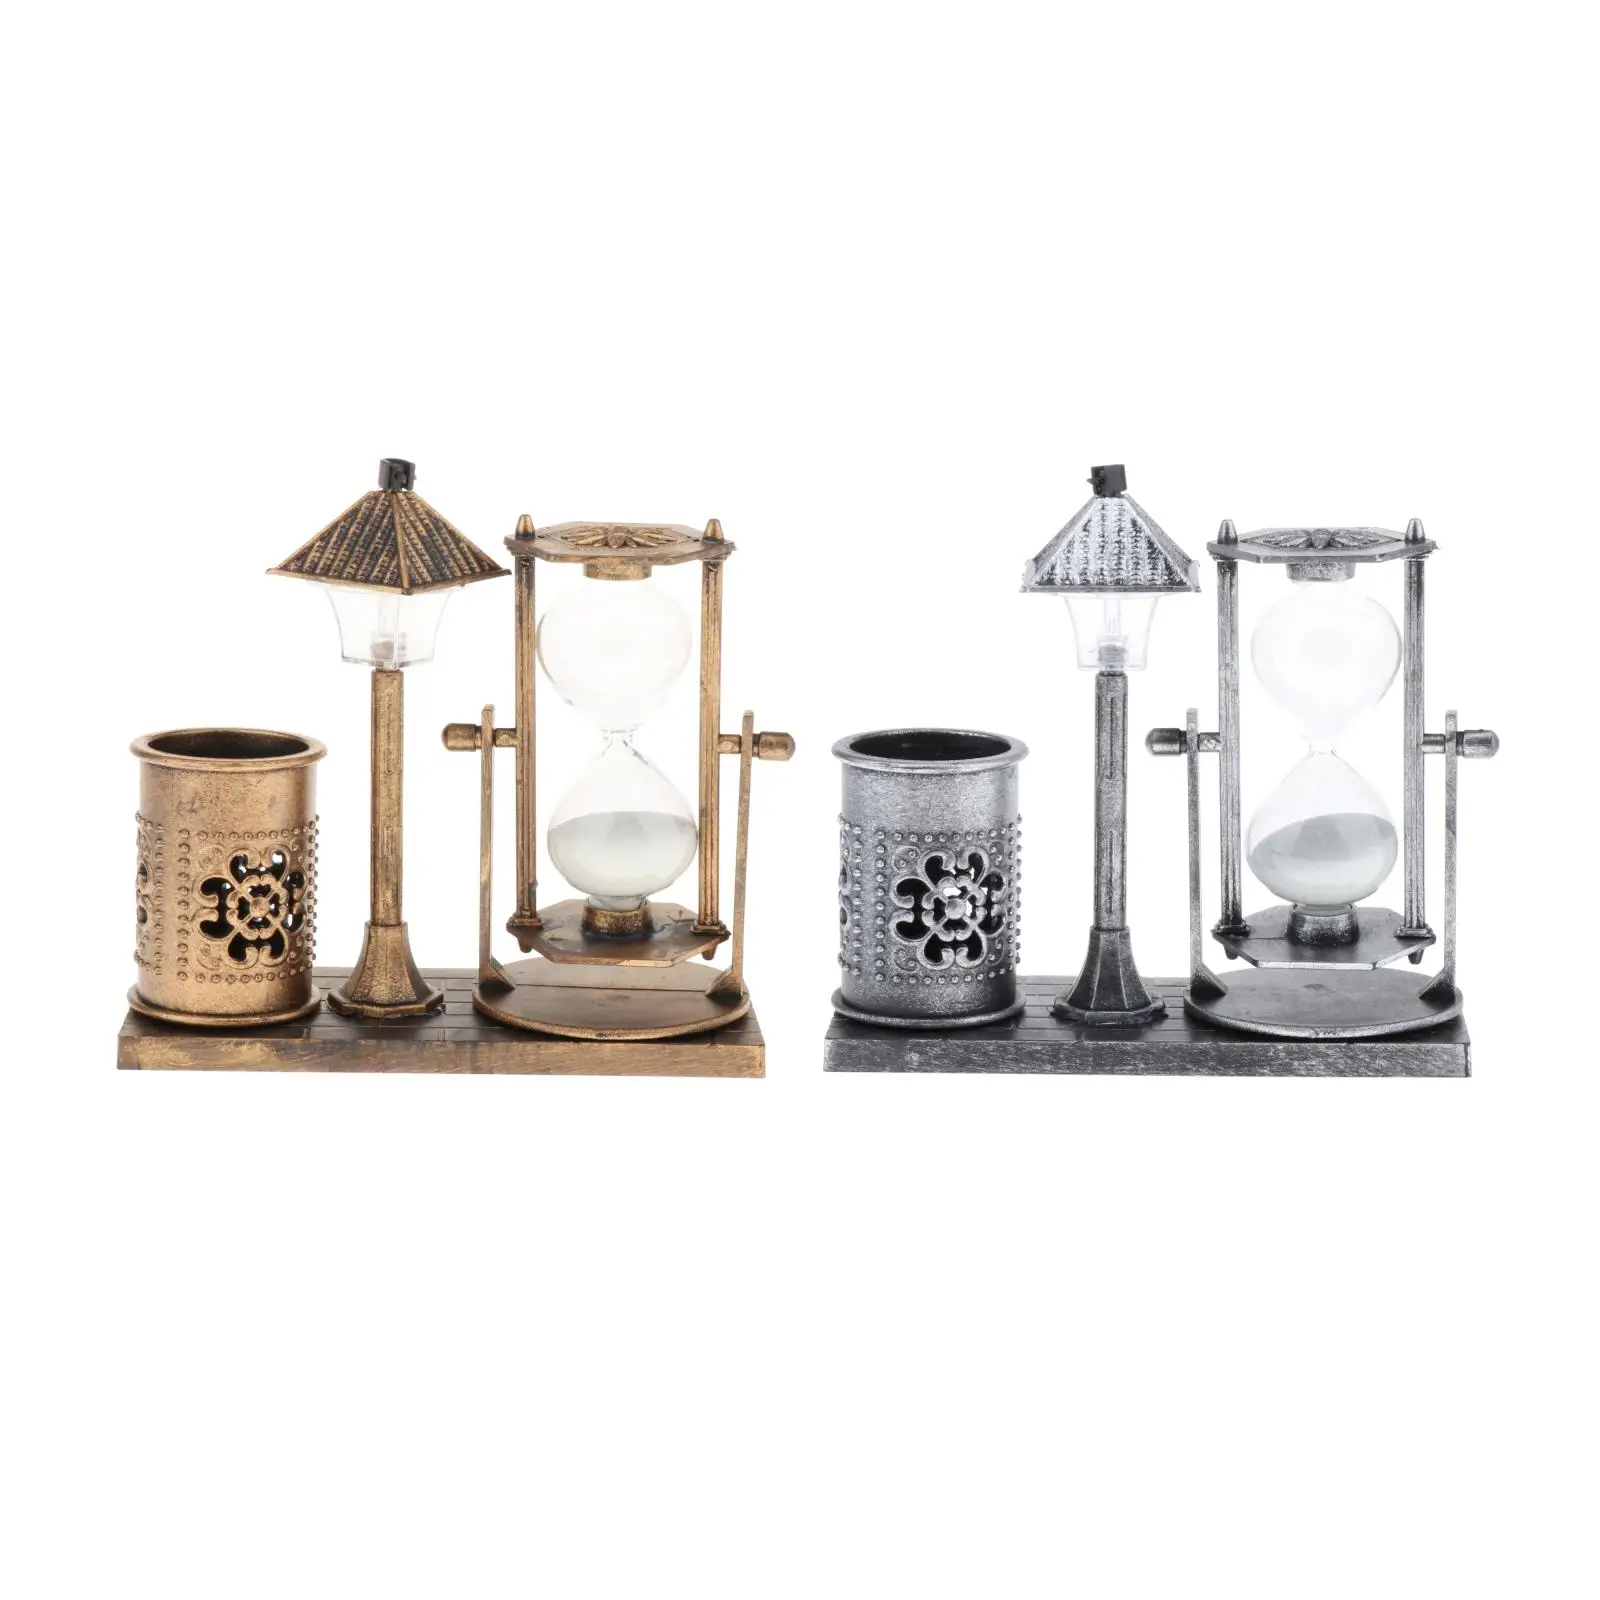 Retro Style Street Light Hourglass Ornaments Night Lights Sand Glass Timers Home Desktop Decorative Cafe Office Display Gift